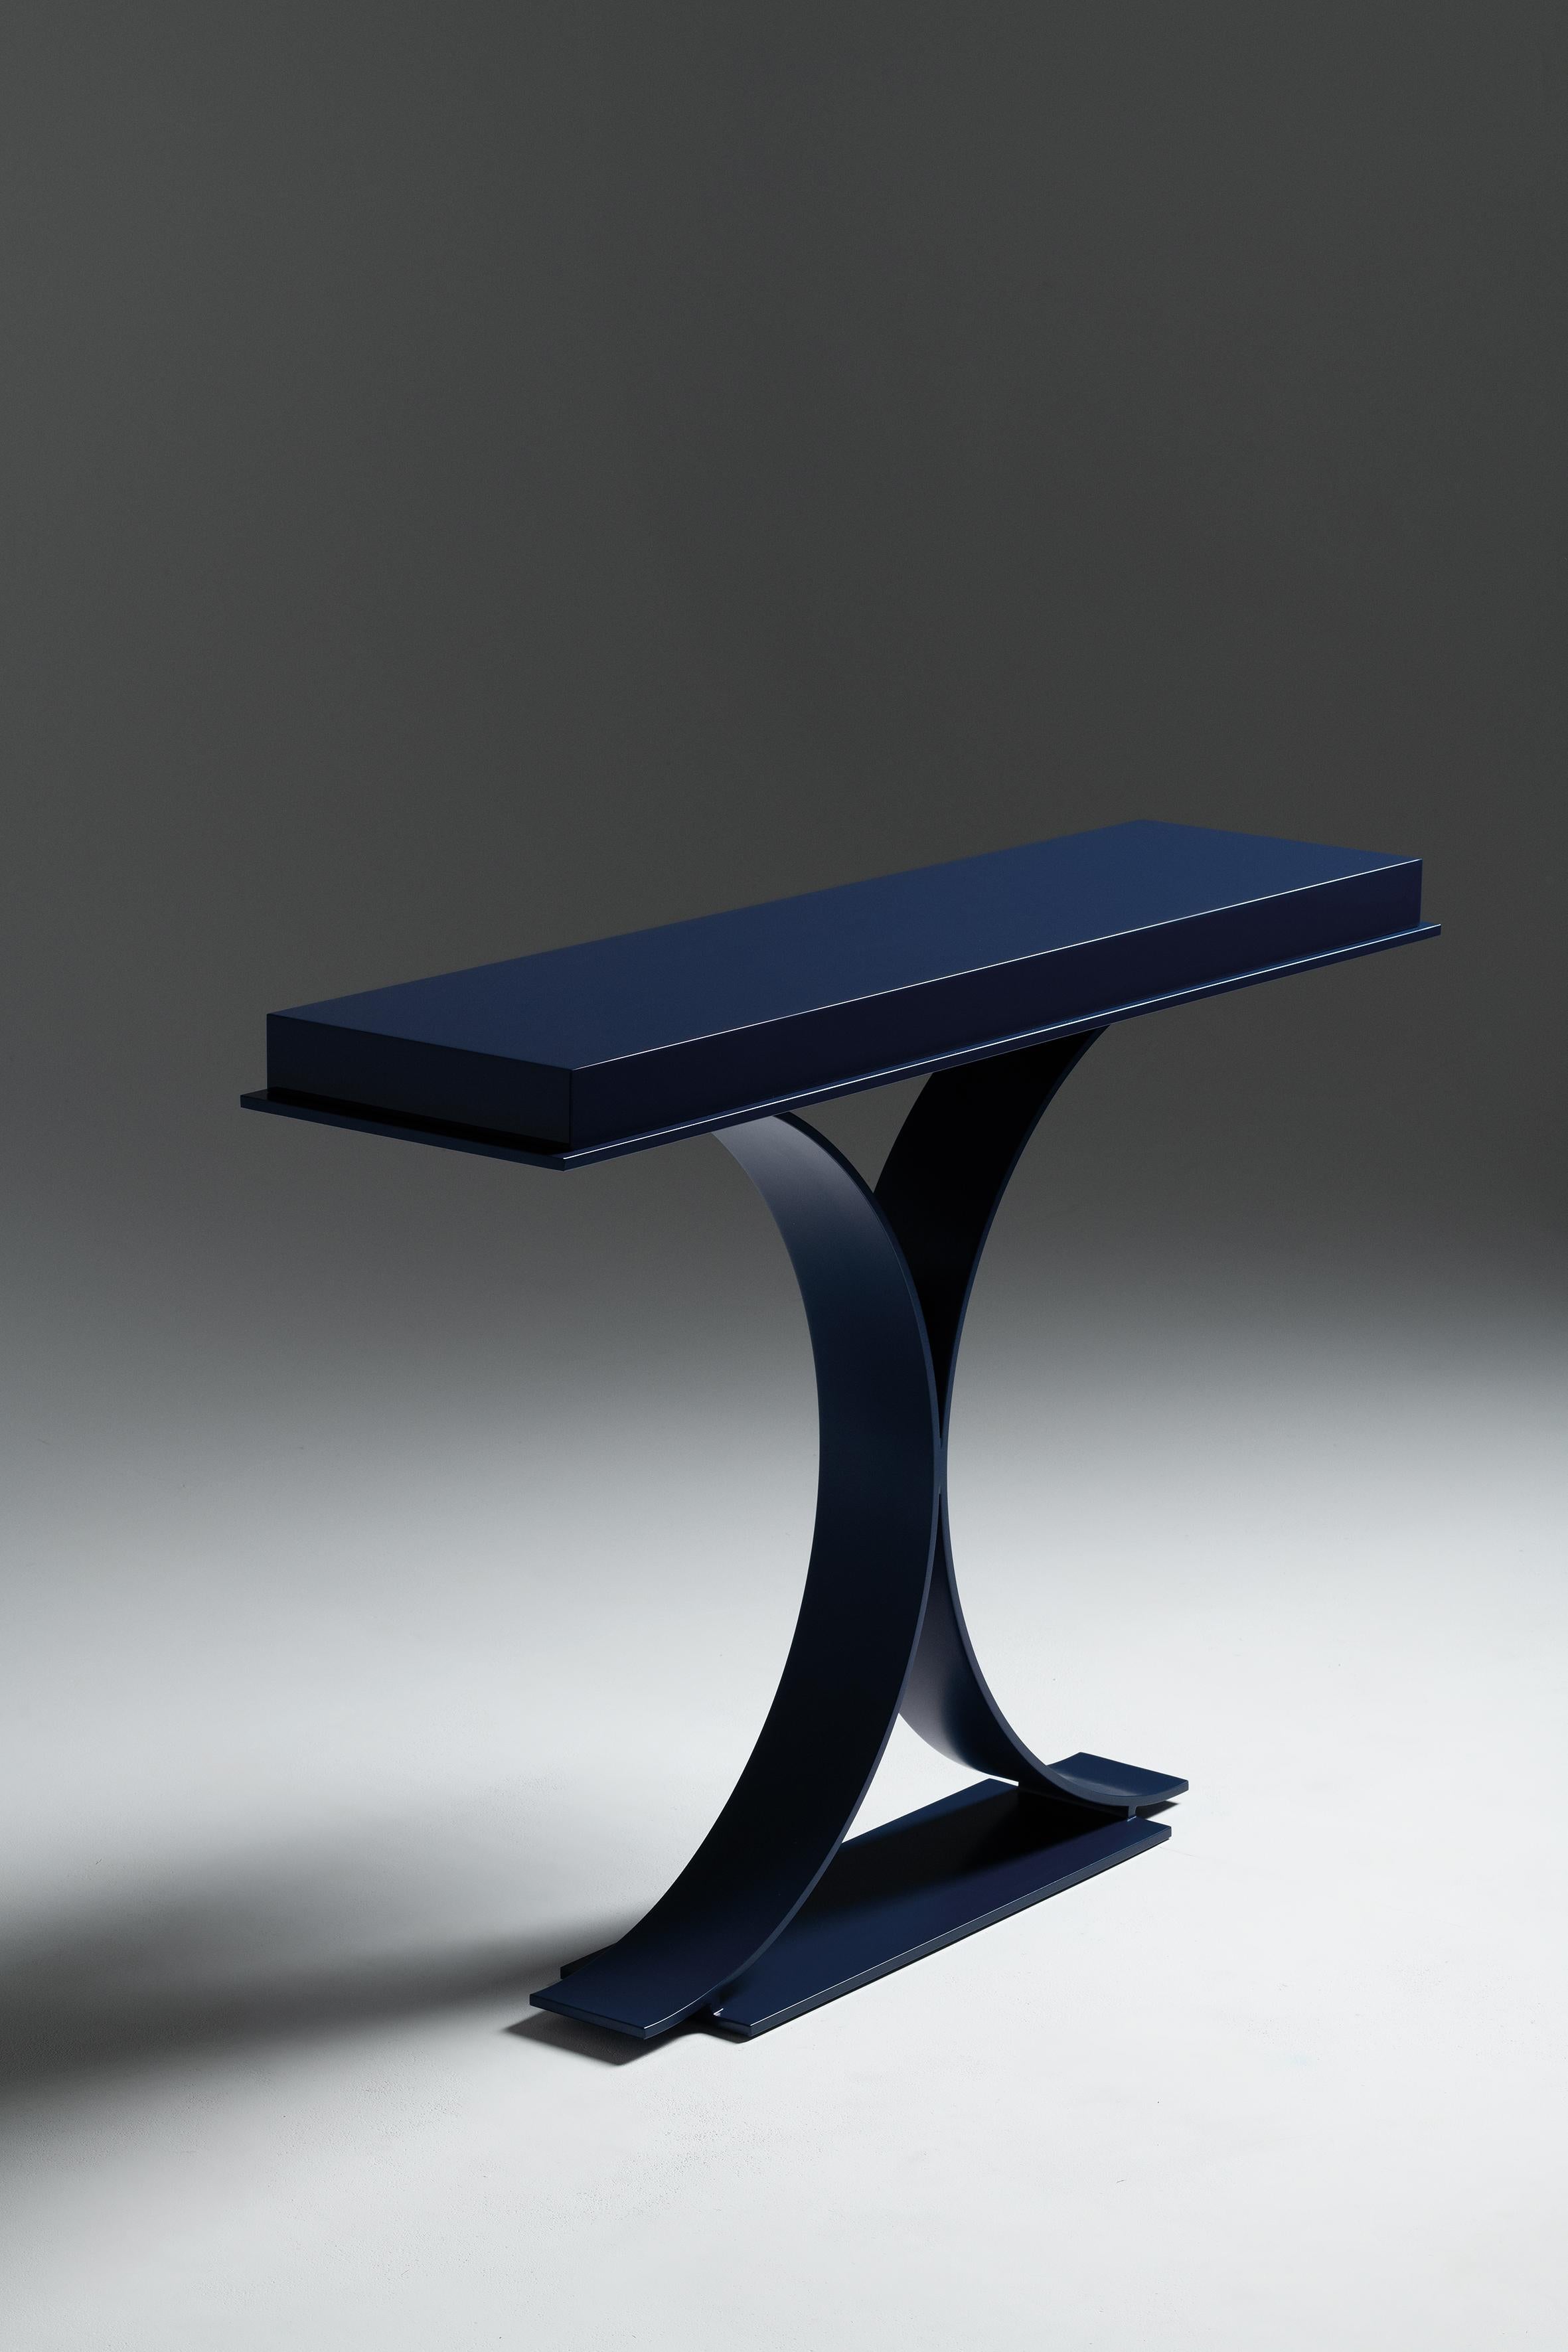 Memphis, France, Le Berre Vevaud
Empreinte Collection
Steel base and wooden tray, glossy blue lacquered finish.